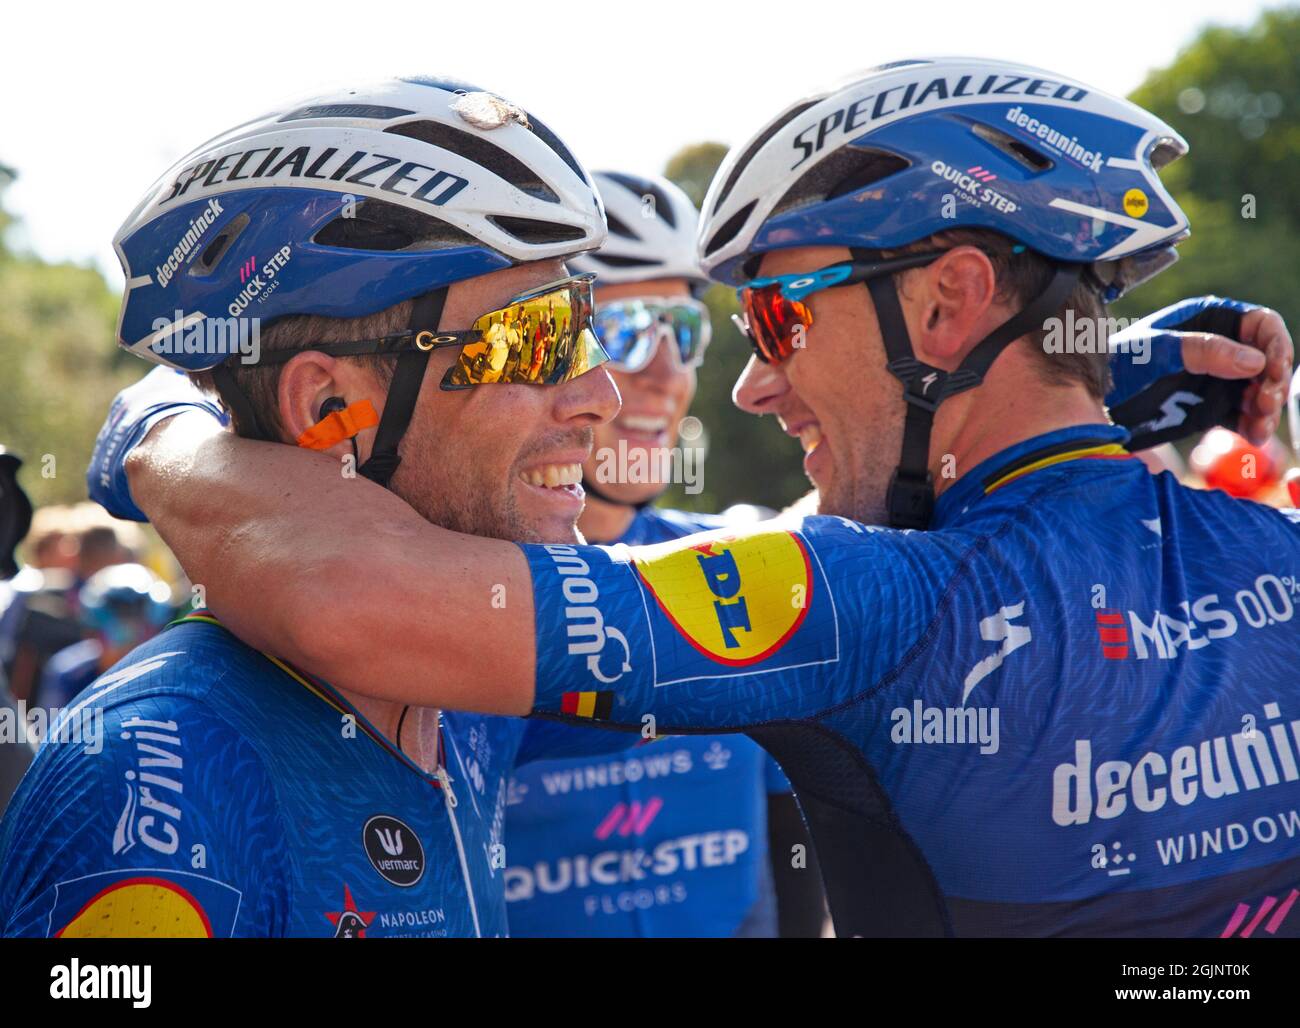 Edinburgh, Scotland, UK. 11th September 2021.  AJ Bell Tour of Britain, 7th leg, finishing in Holyrood Park. Belgian rider Yves Lampaert took Deceuninck – Quick-Step’s first victory of this tour. Pictured: Mark Cavendish celebrates with team mates. Stock Photo